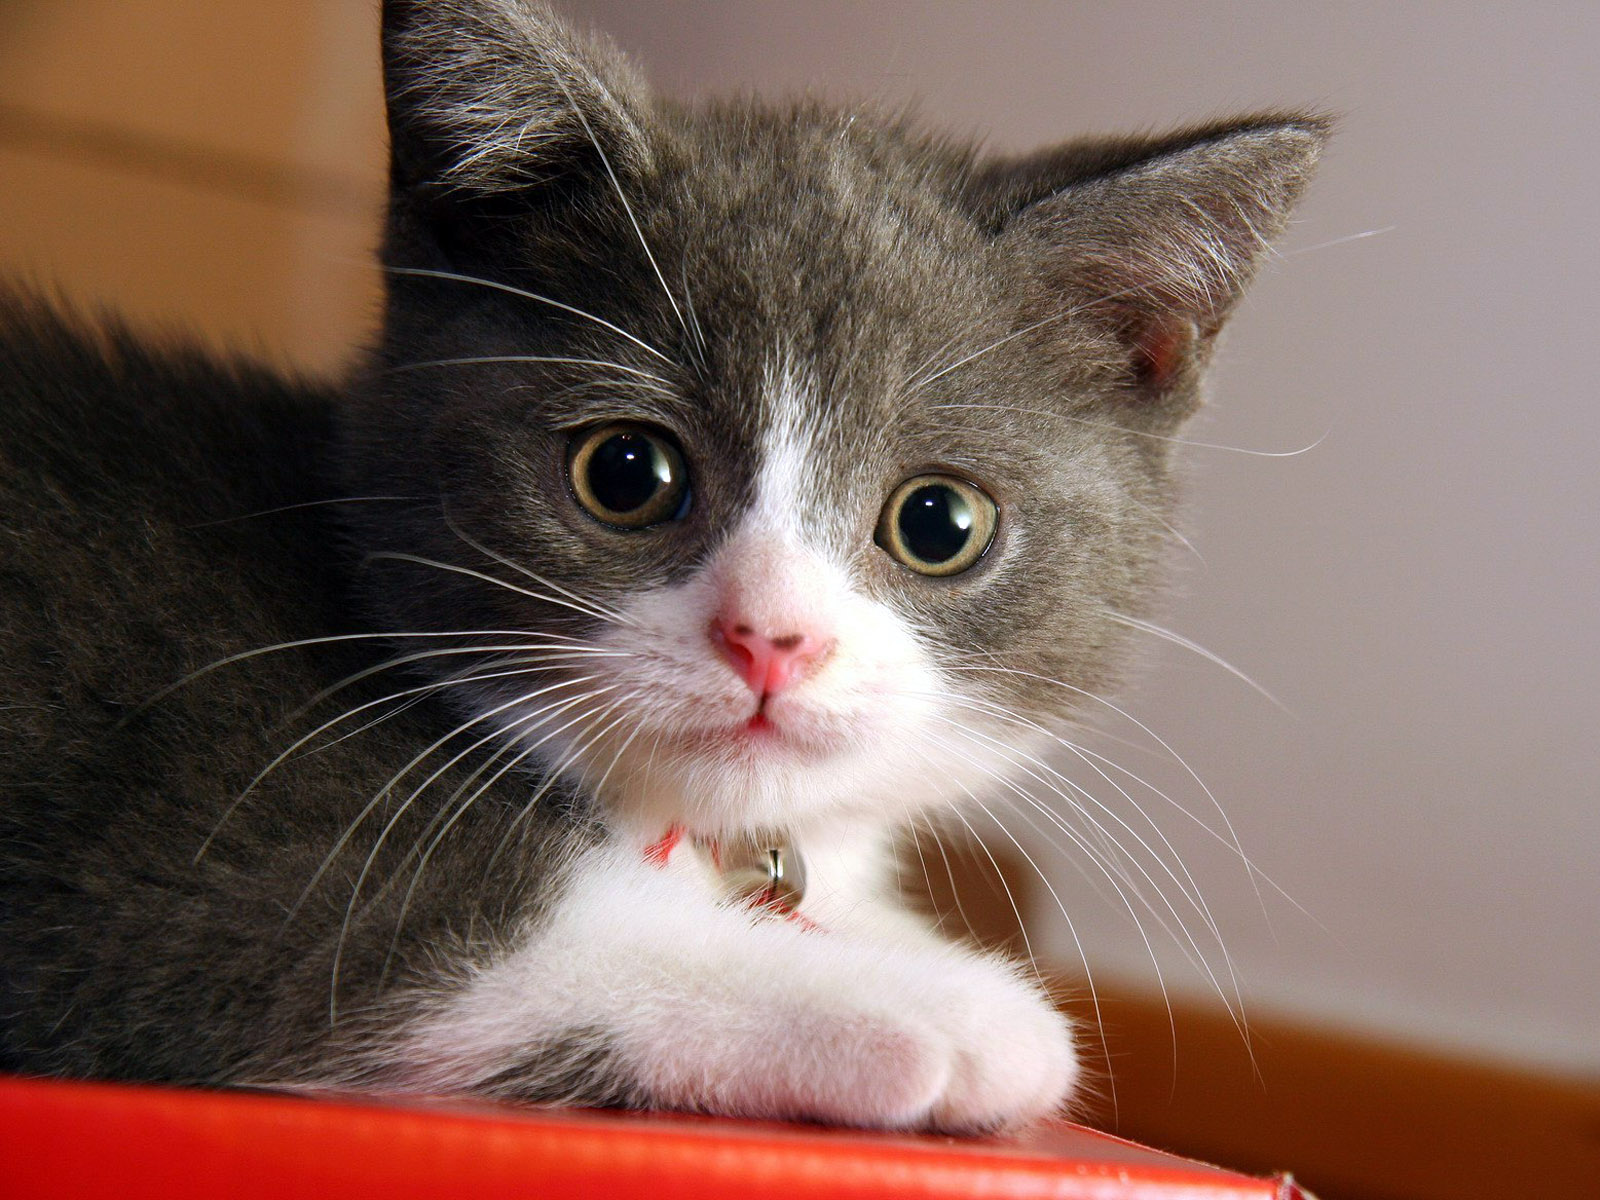 Kitten Wallpaper To Share On Your Desktop A Great Site For Any